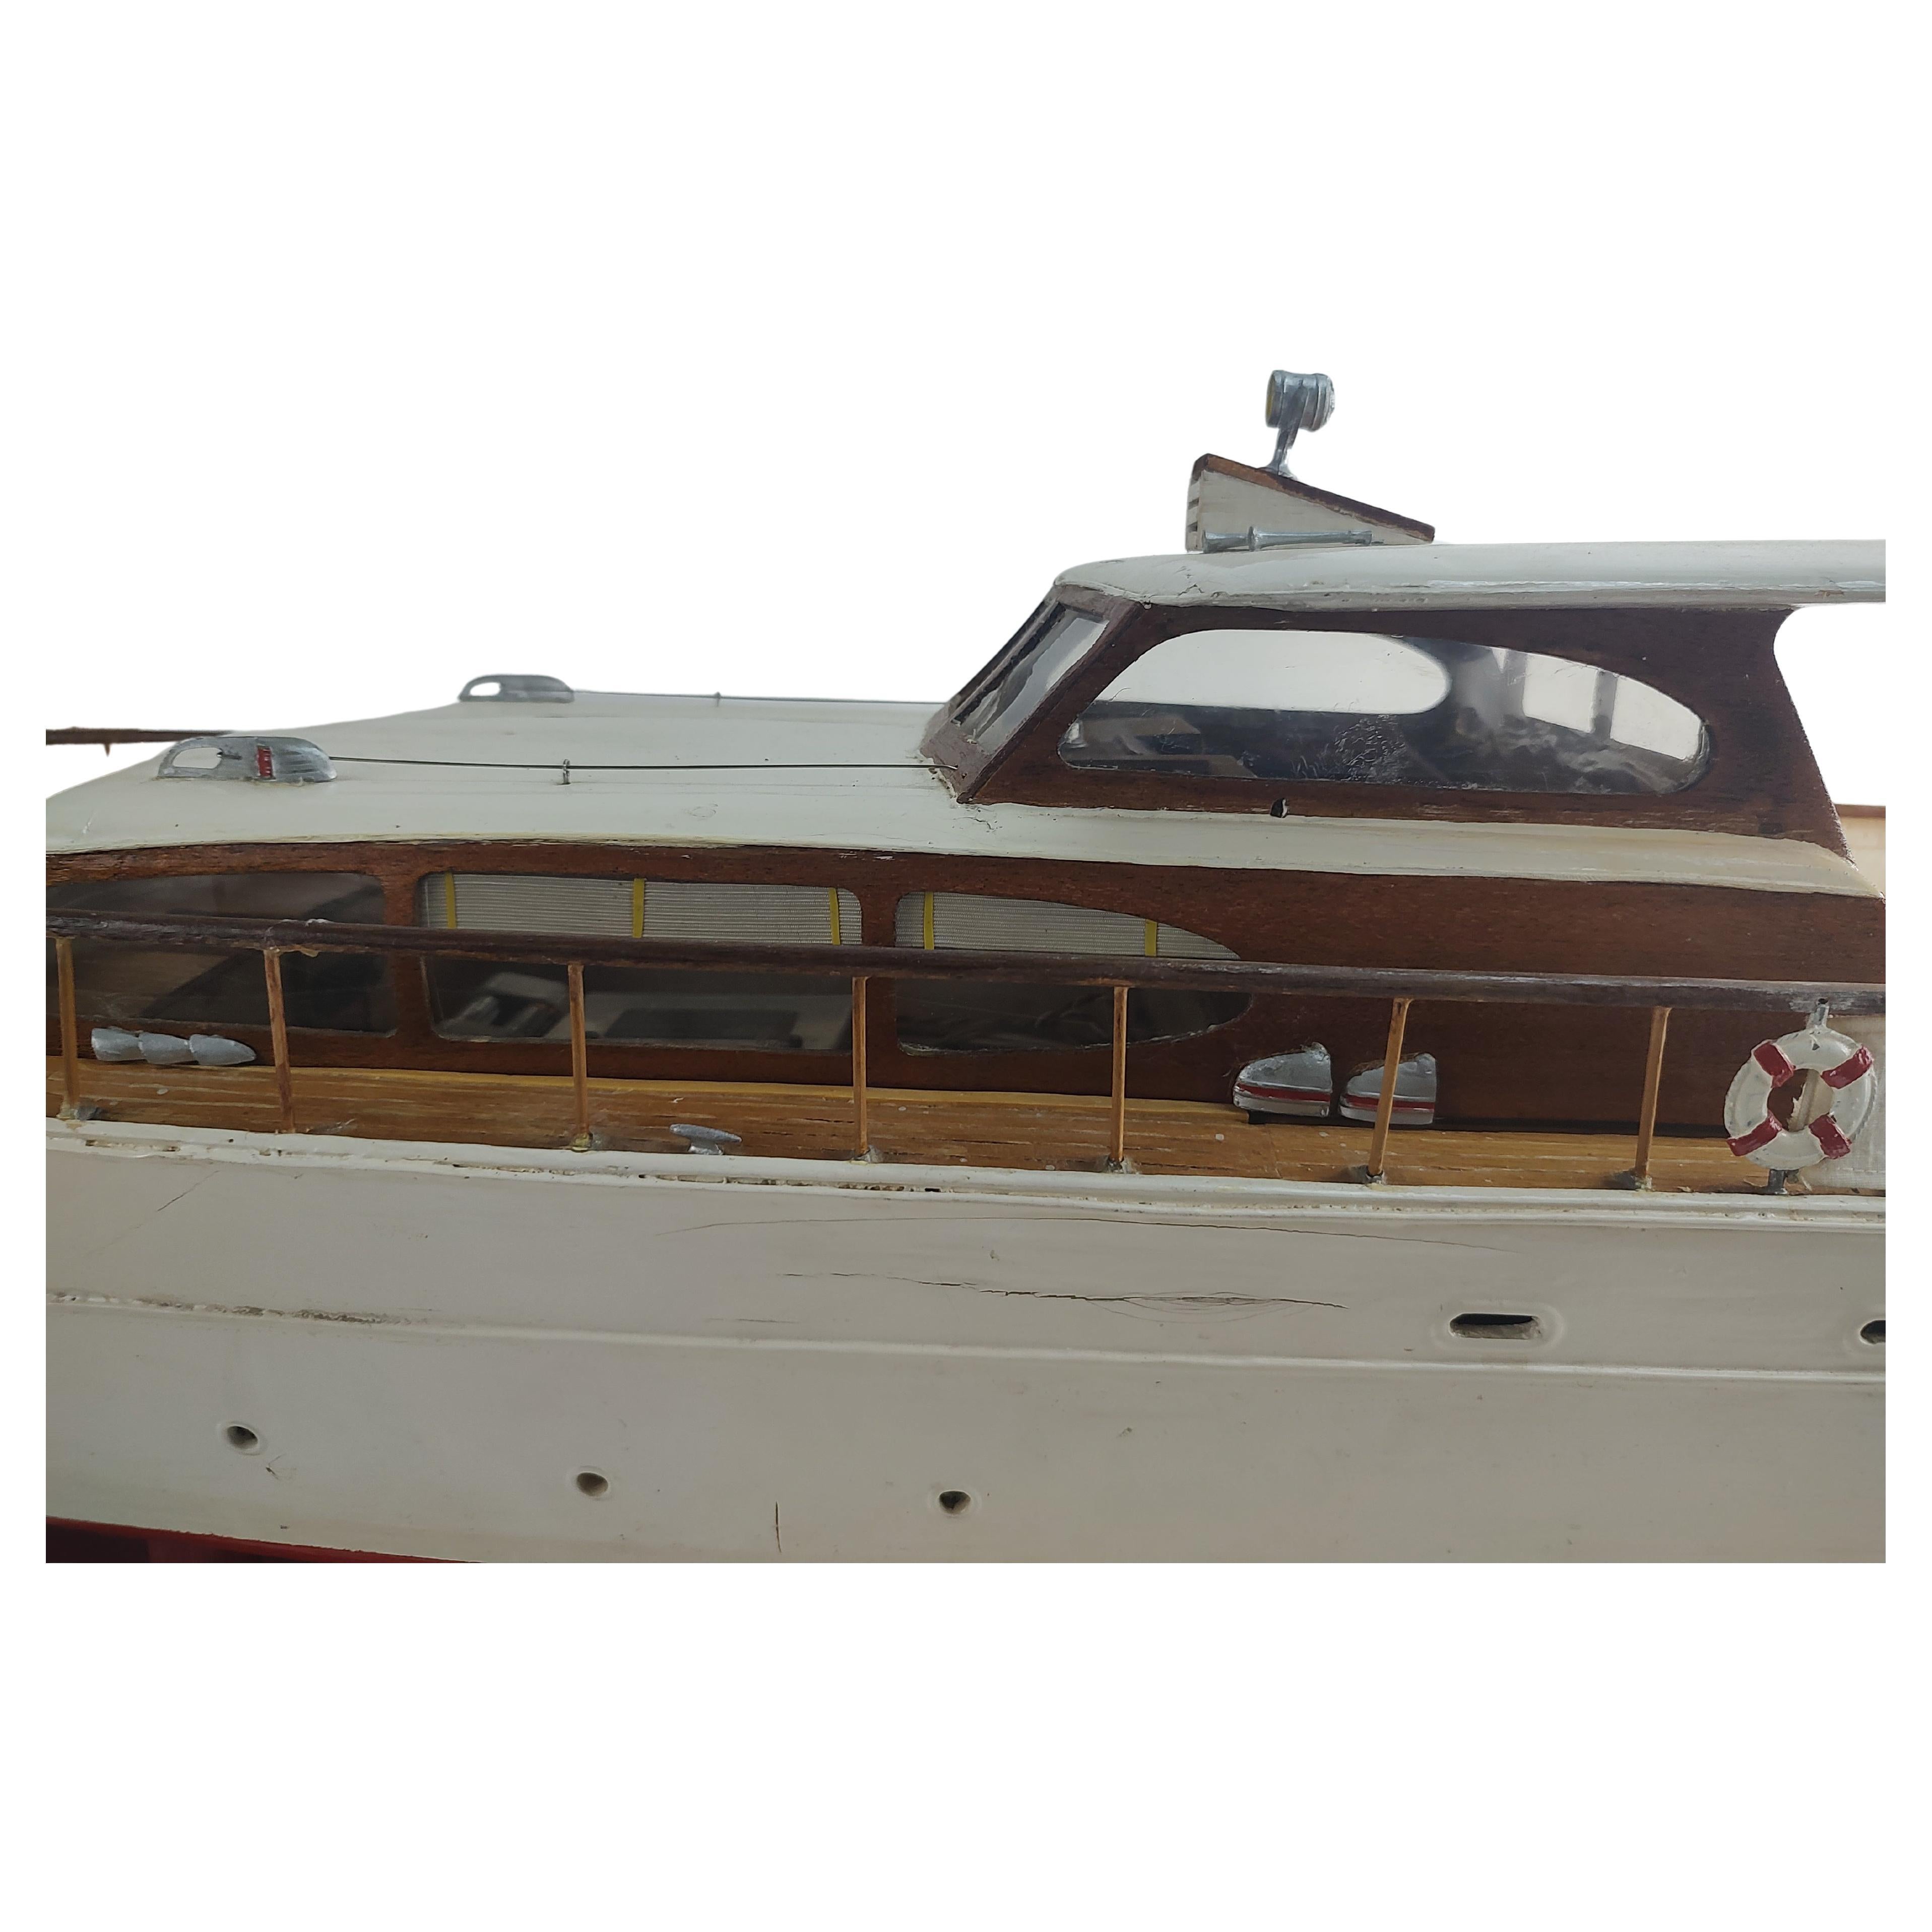 Fabulous and large cabin cruiser boat model with an untested motor and batteries. 41.5 inches long and sitting on a brand new custom made stand with a nautical theme. In very good vintage condition with some minor age related wear. Has it all going